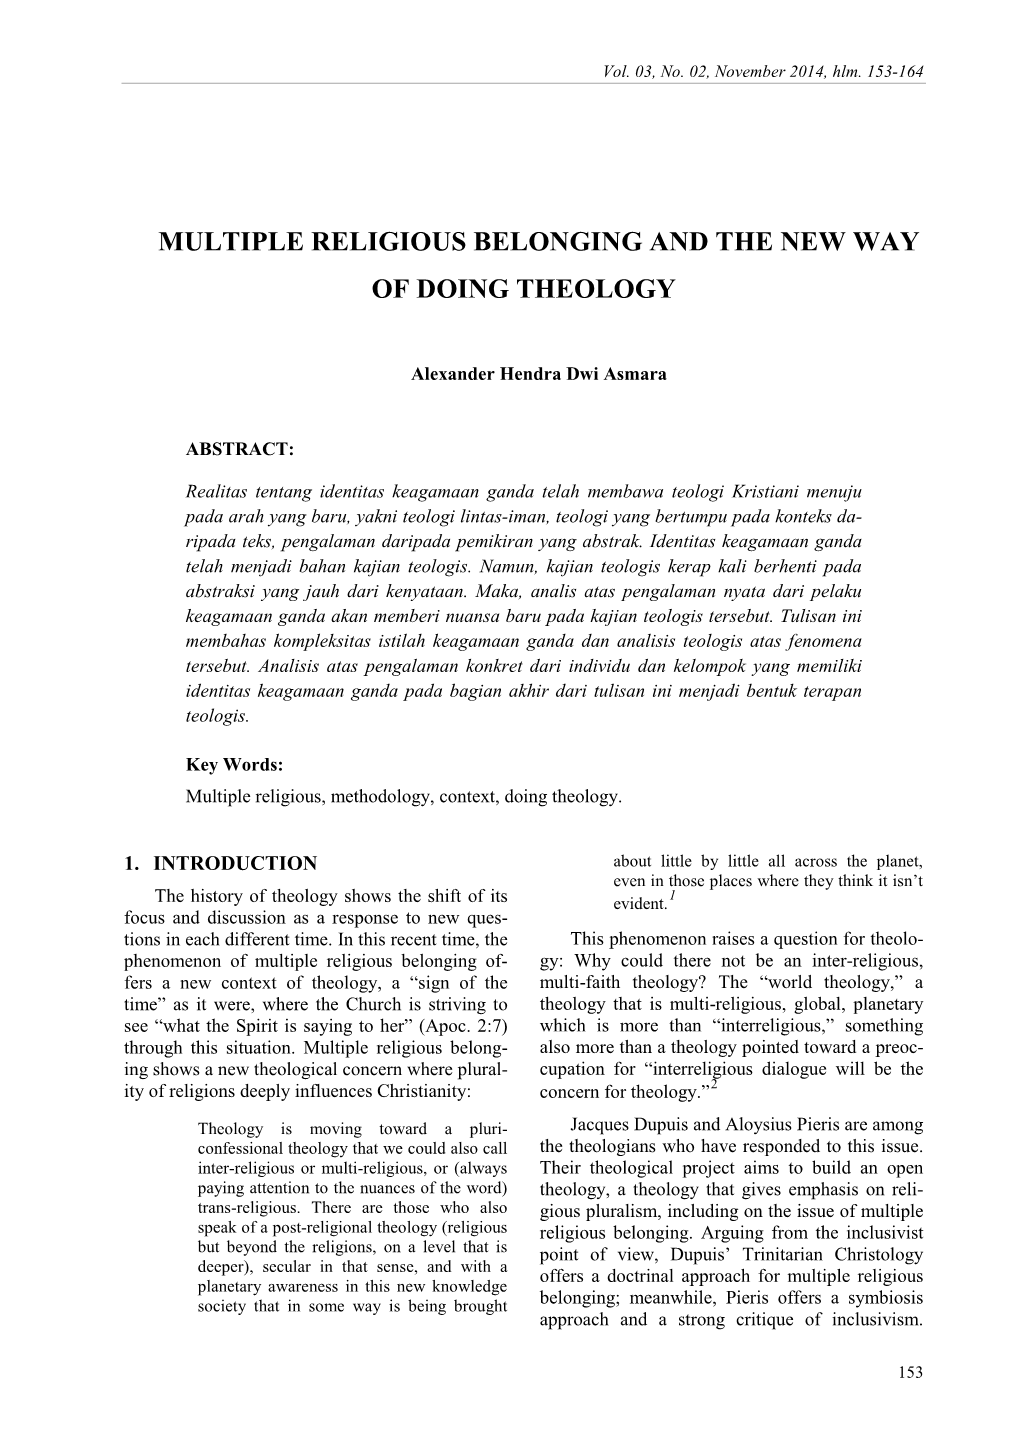 Multiple Religious Belonging and the New Way of Doing Theology